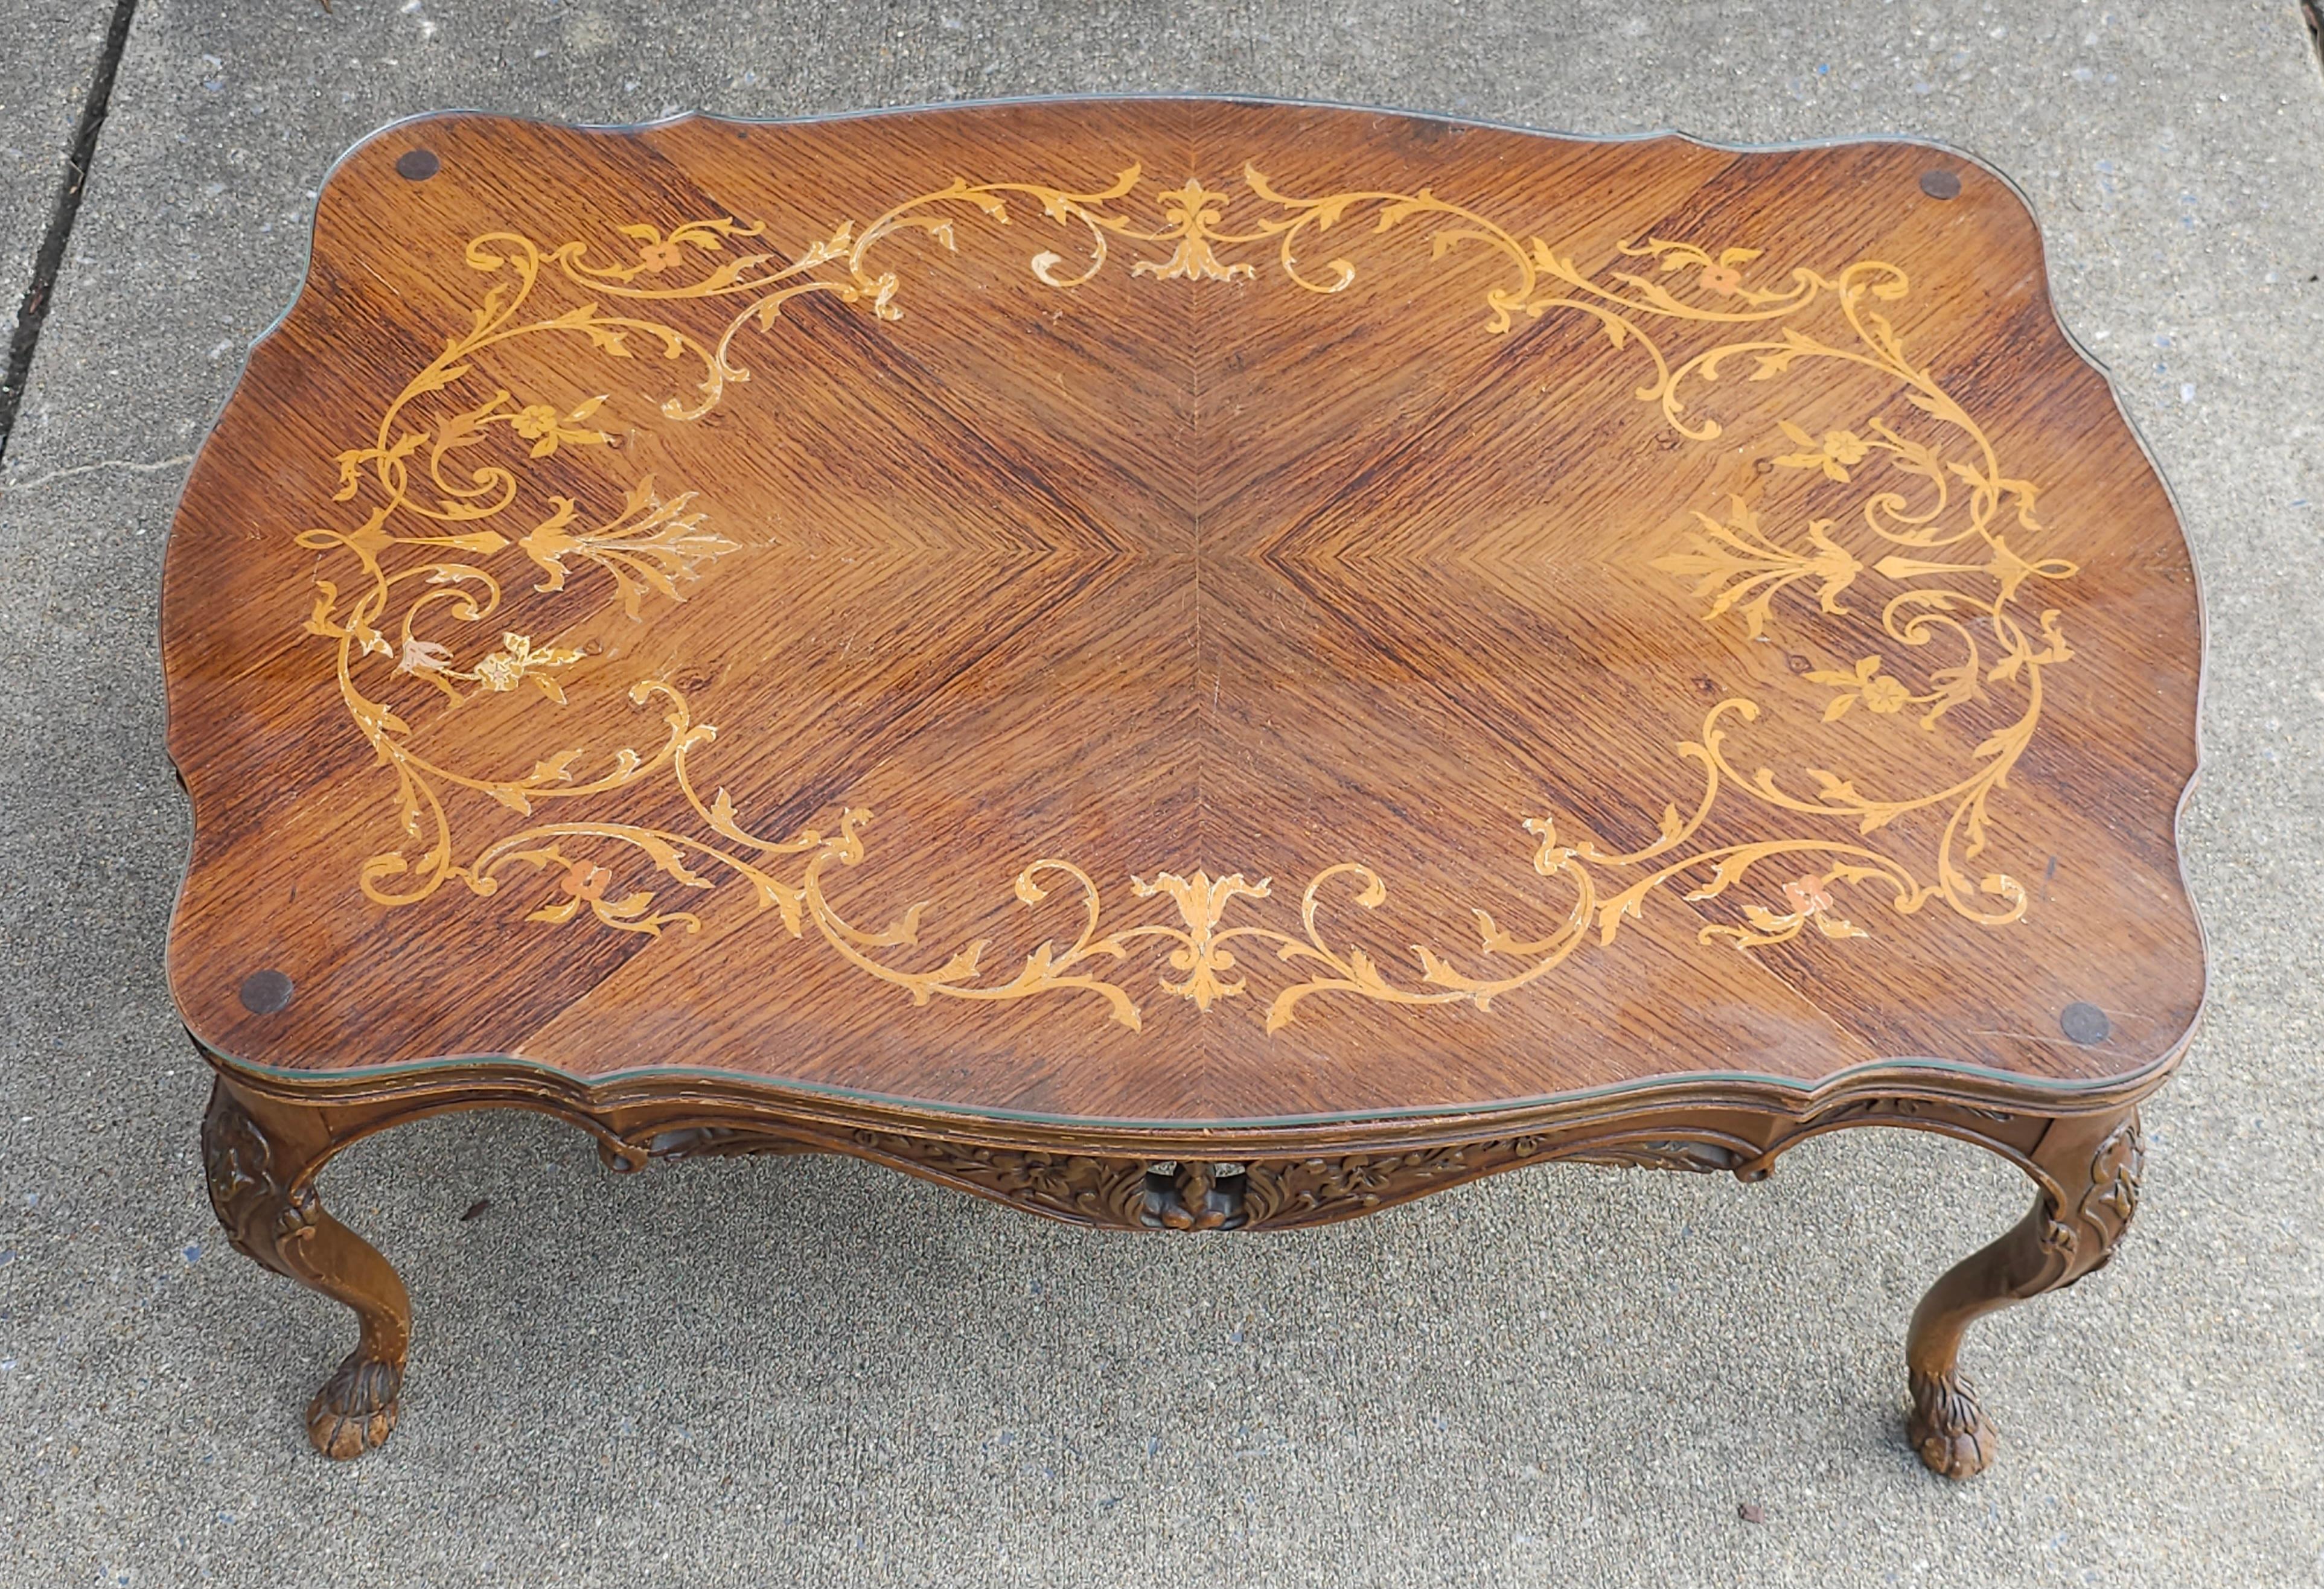 Edwardian Rococo Style Satinwood Marquetry Cocktail Table with Protective Glass  In Good Condition For Sale In Germantown, MD